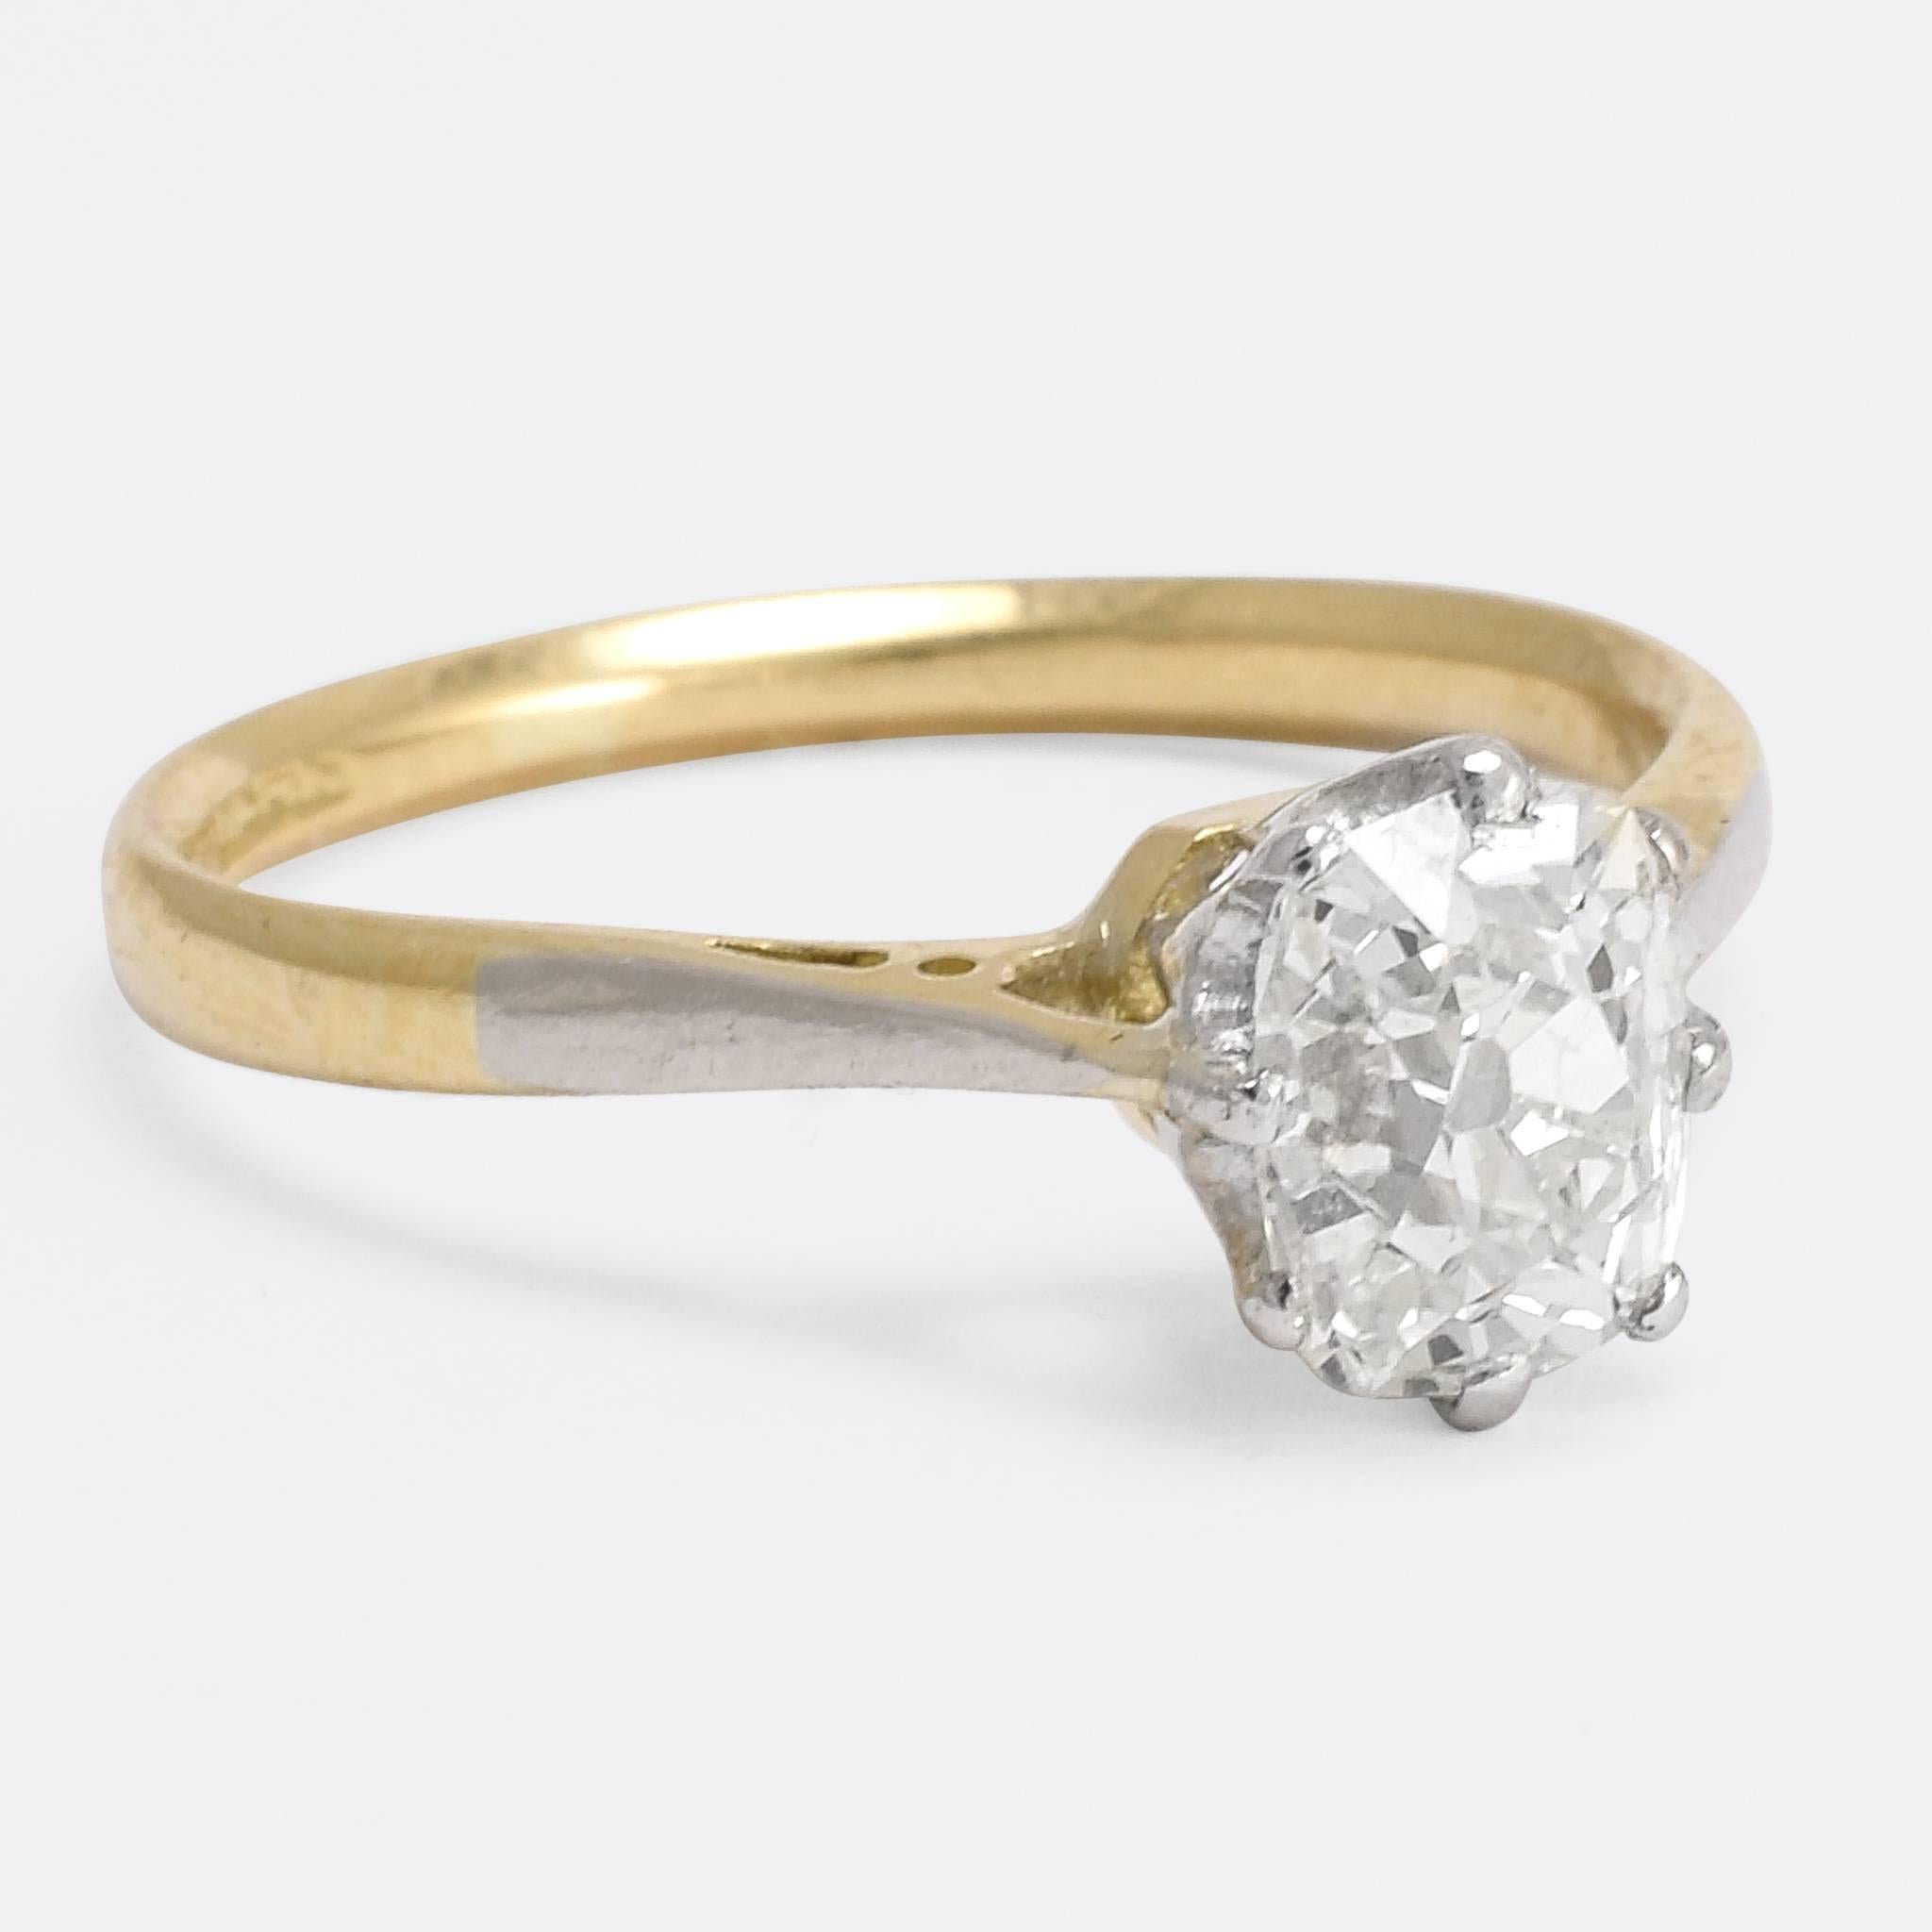 An exceptional antique diamond solitaire engagement ring, set with a 1.5ct OMC diamond. The old mine cut - known as old miners - was developed in the 18th Century, cut by hand into a rounded square (or in this case rectangle) they feature a high